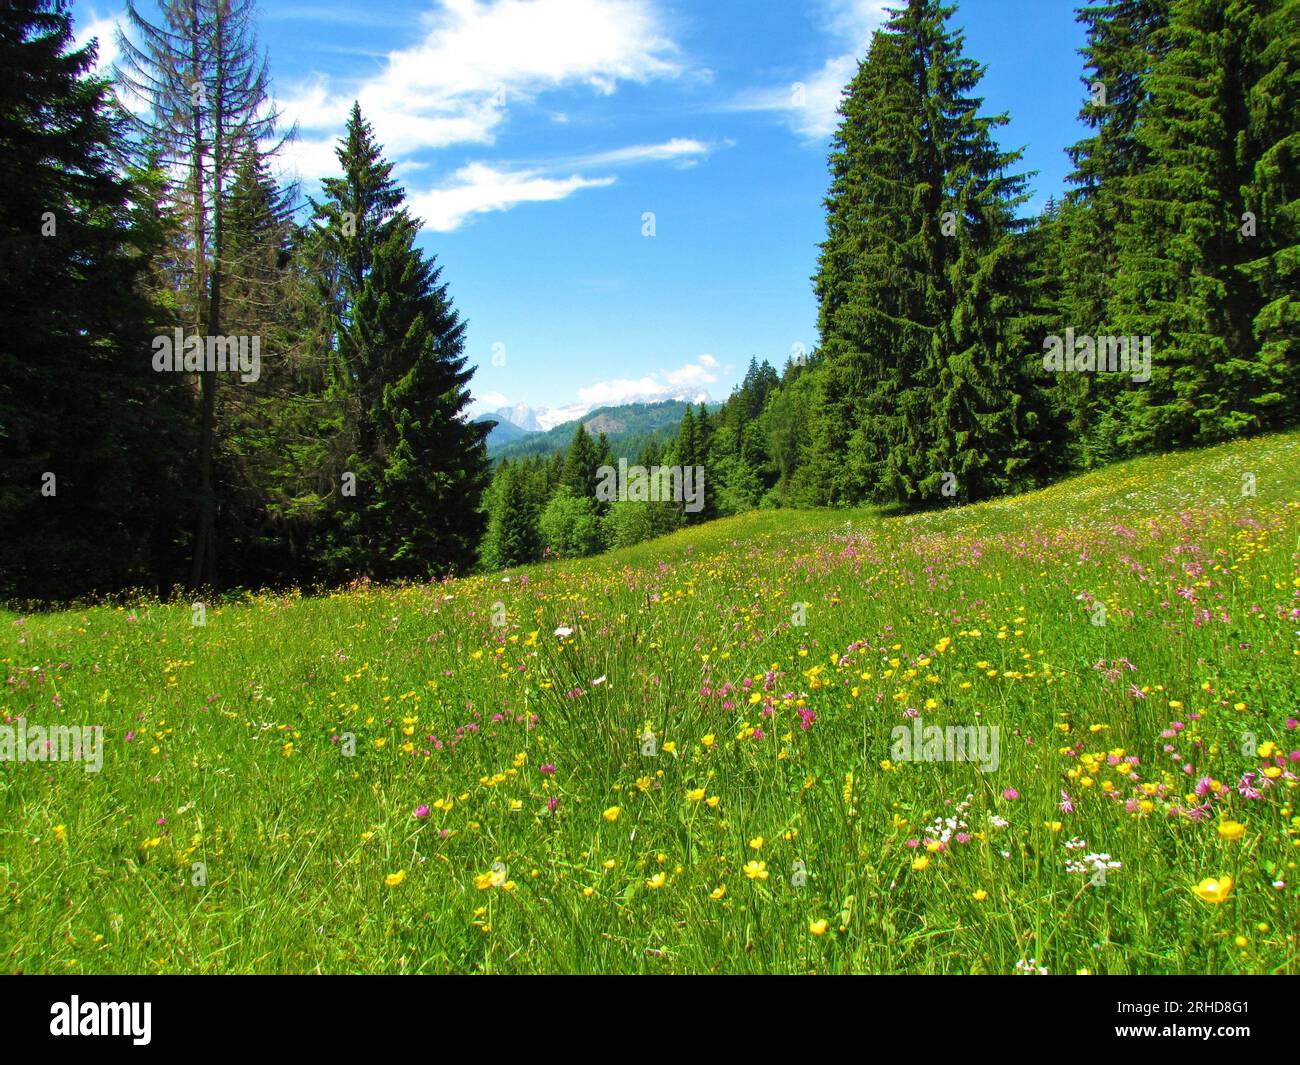 Meadow with pink blooming ragged-robin (Silene flos-cuculi) flowers and tall spruce trees on the side in Gorenjska, Slovenia Stock Photo